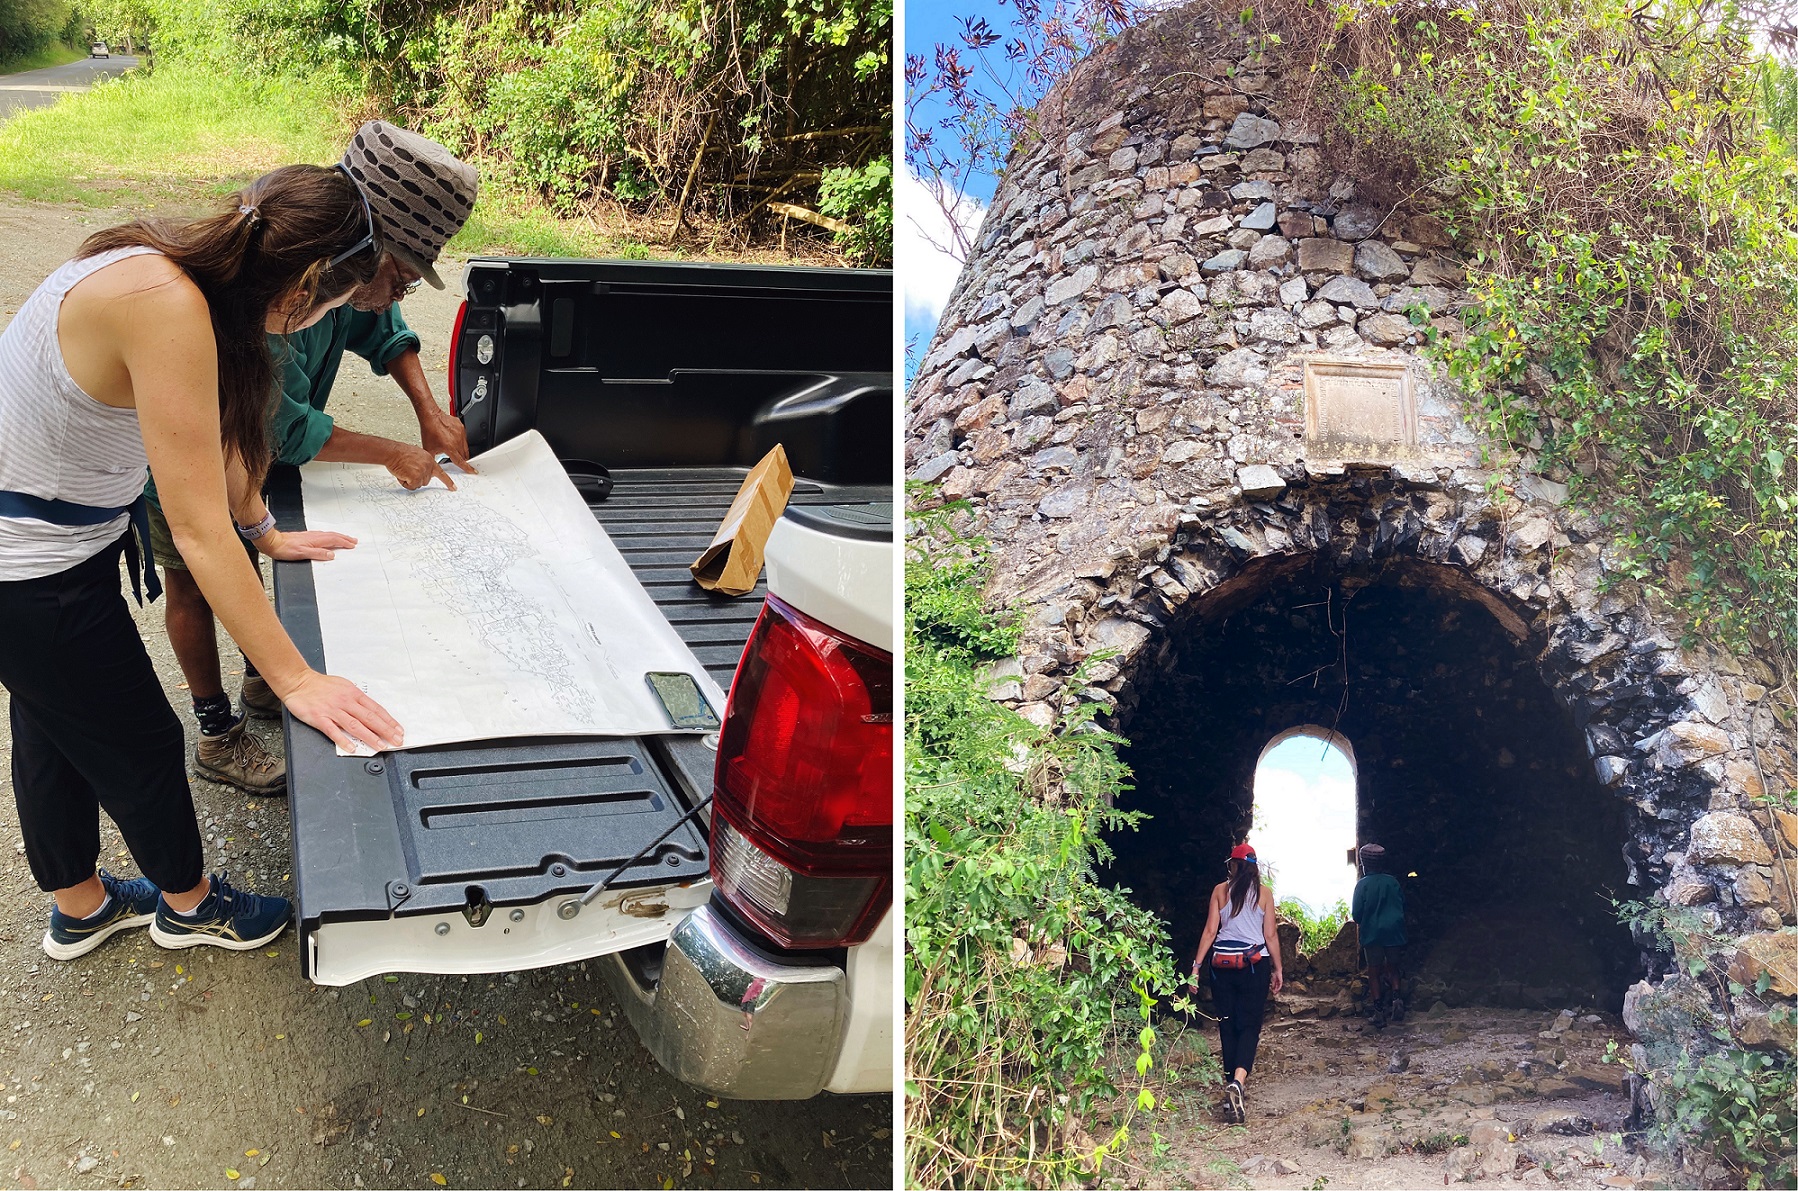 In the left photo, two people look at a map on the open tailgate of a white pickup truck. In the right photo, two people walk under an archway into a stone tower